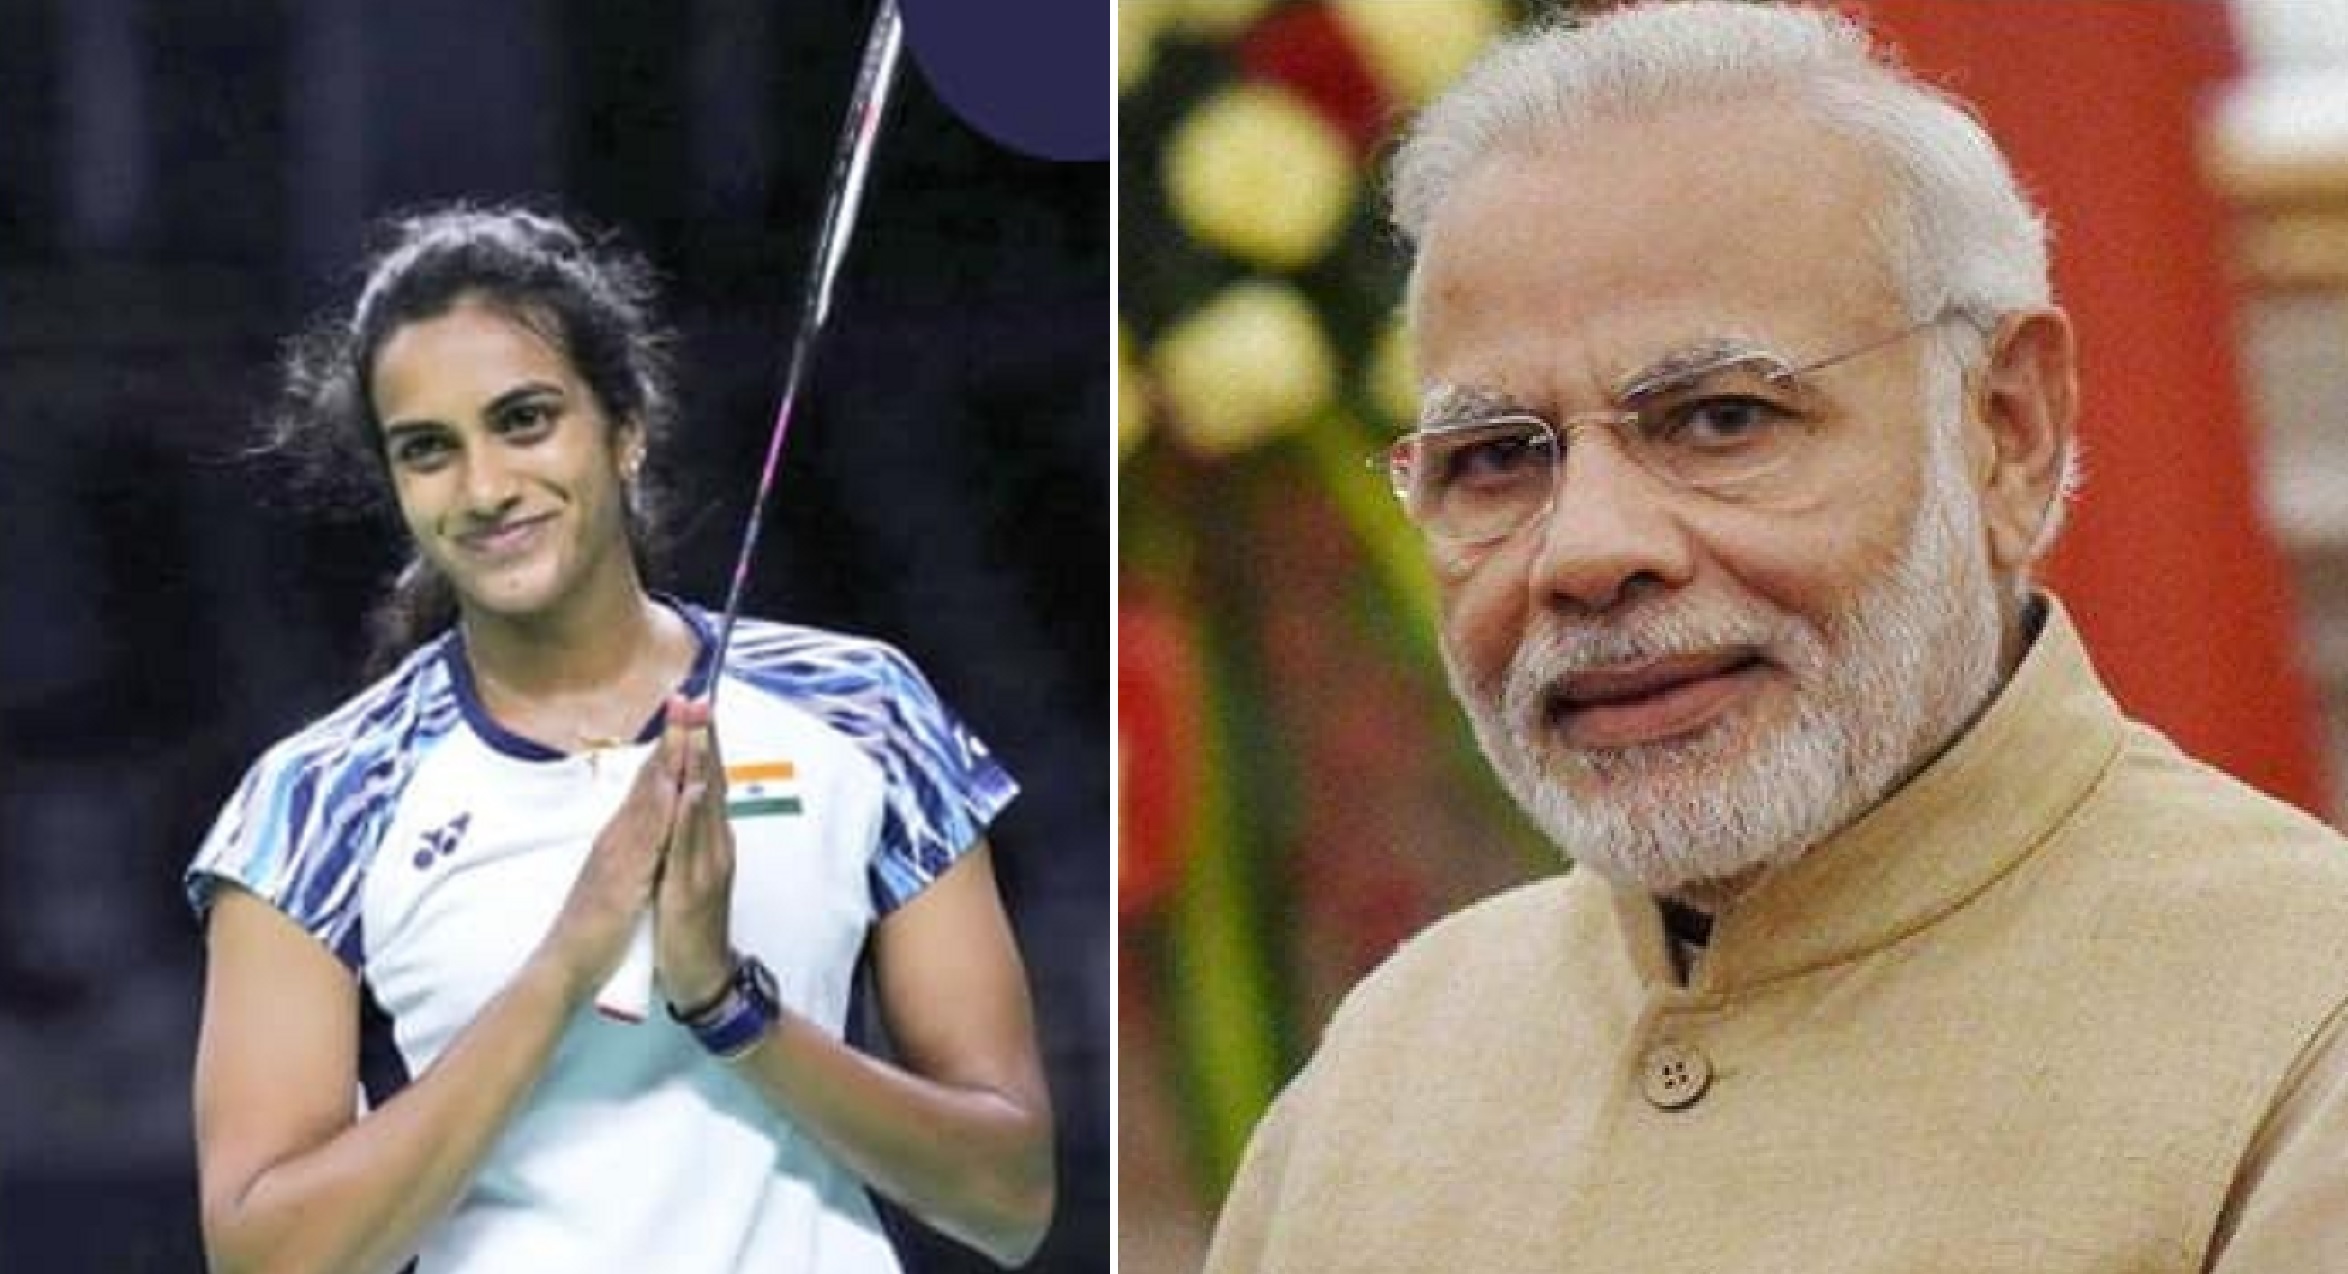 PV Sindhu Wins Her Historic Maiden Singapore Open Title, PM Modi Showers Praises On Her